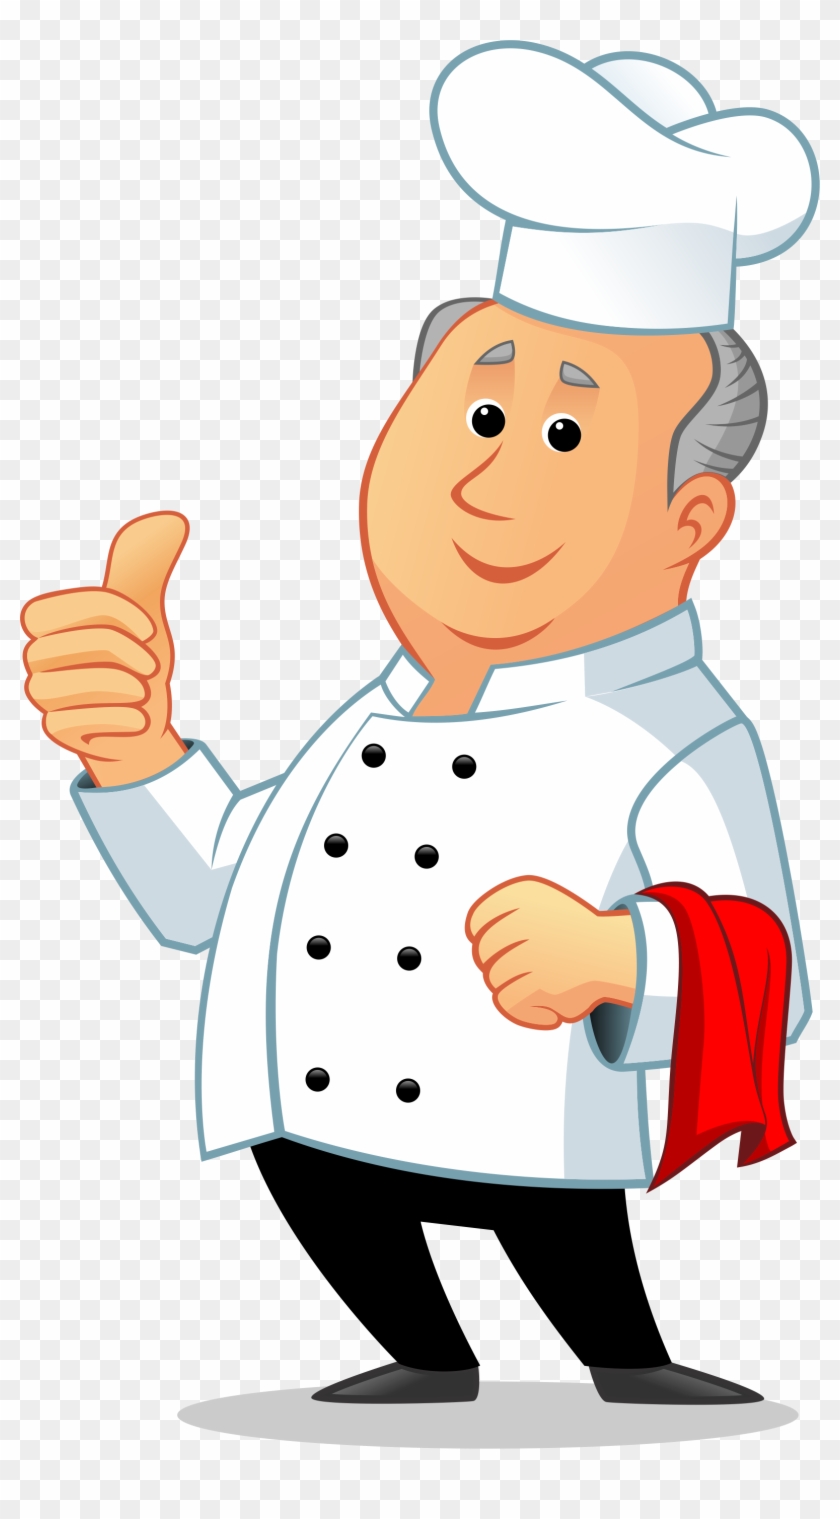 Chef Larry Gives A Hearty Thumbs Up To The Restaurant - Cartoon Chef Transparent Clipart #244565